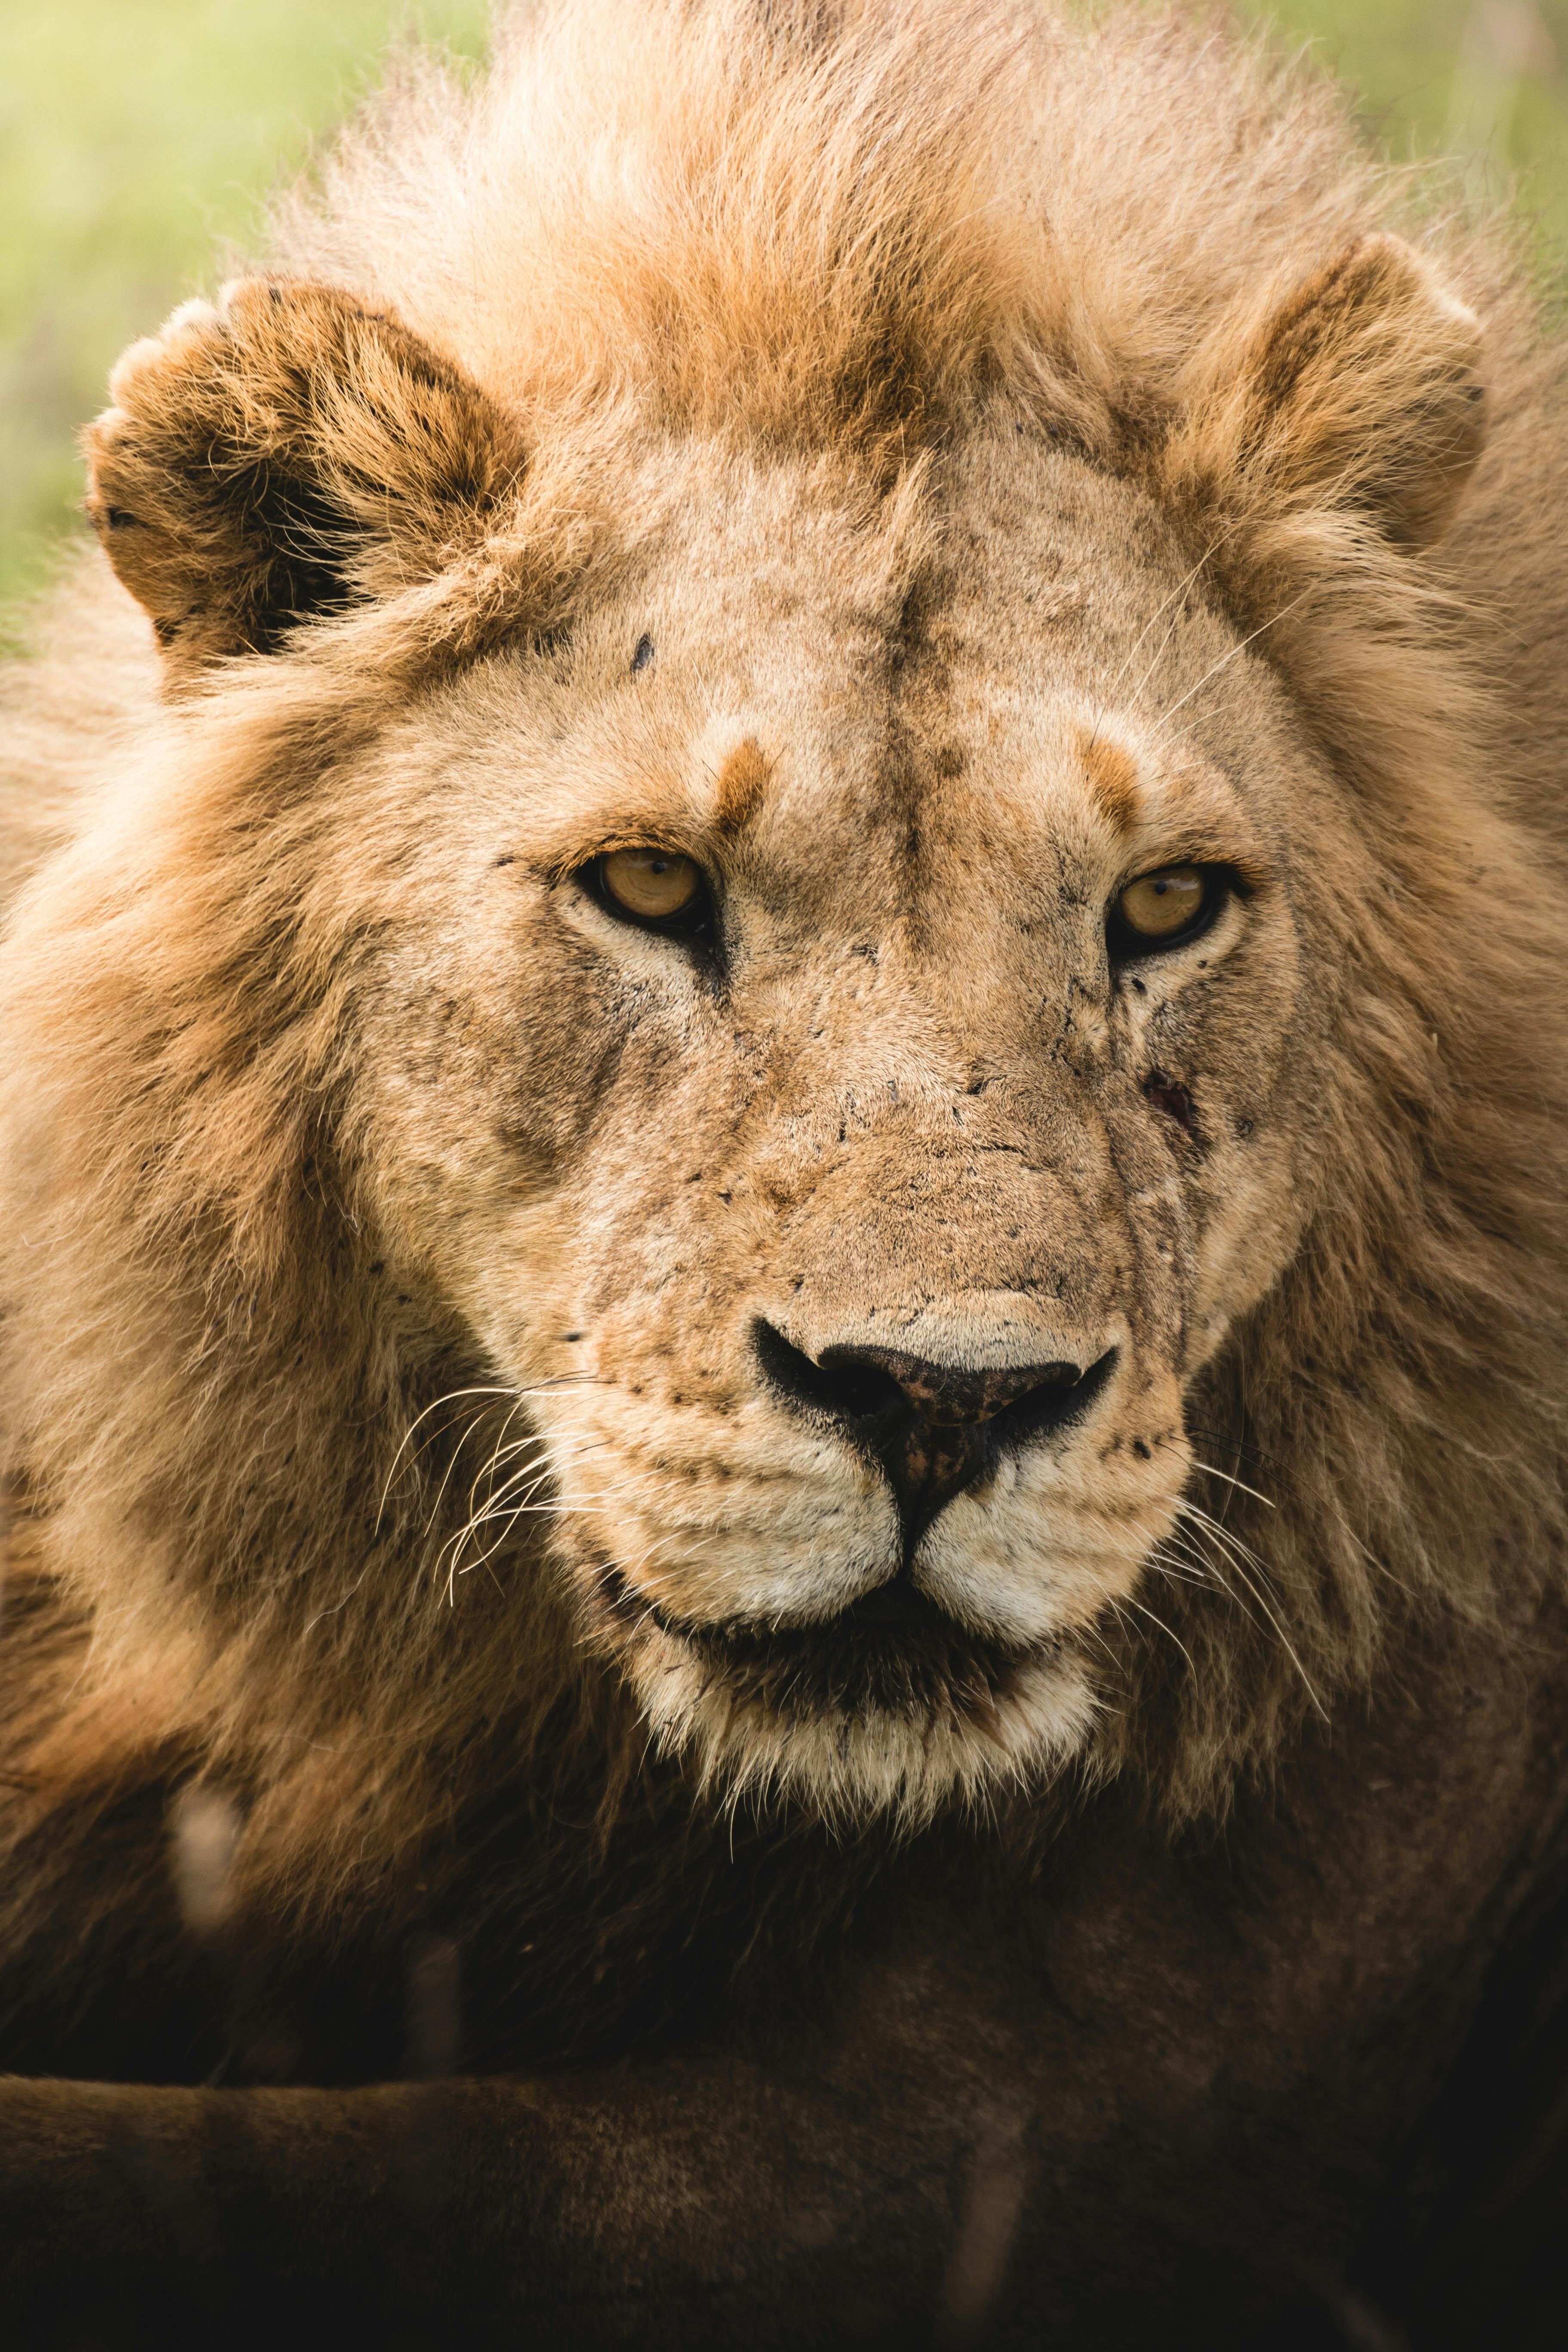 Lion Wallpaper APK for Android Download